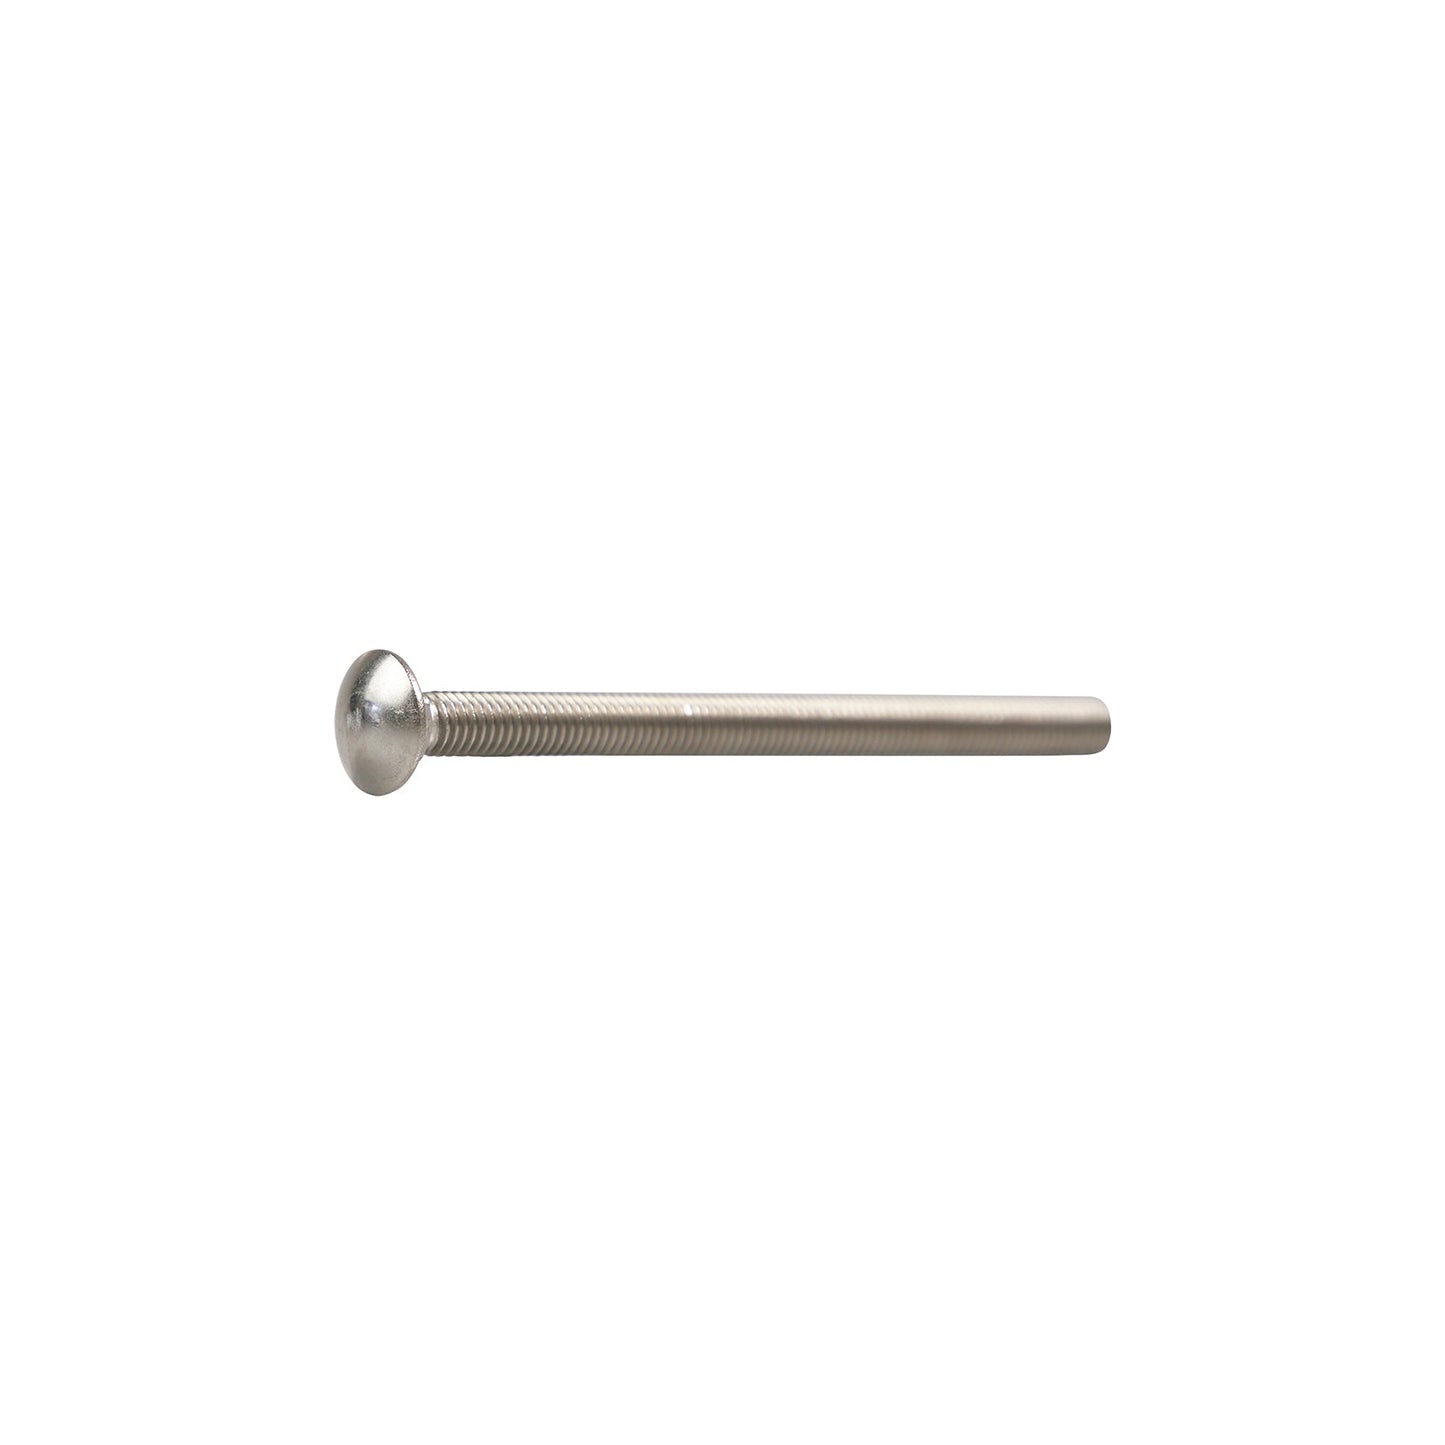 3/8"-16 x 5-1/2" Conquest Carriage Bolt - 304 Stainless Steel